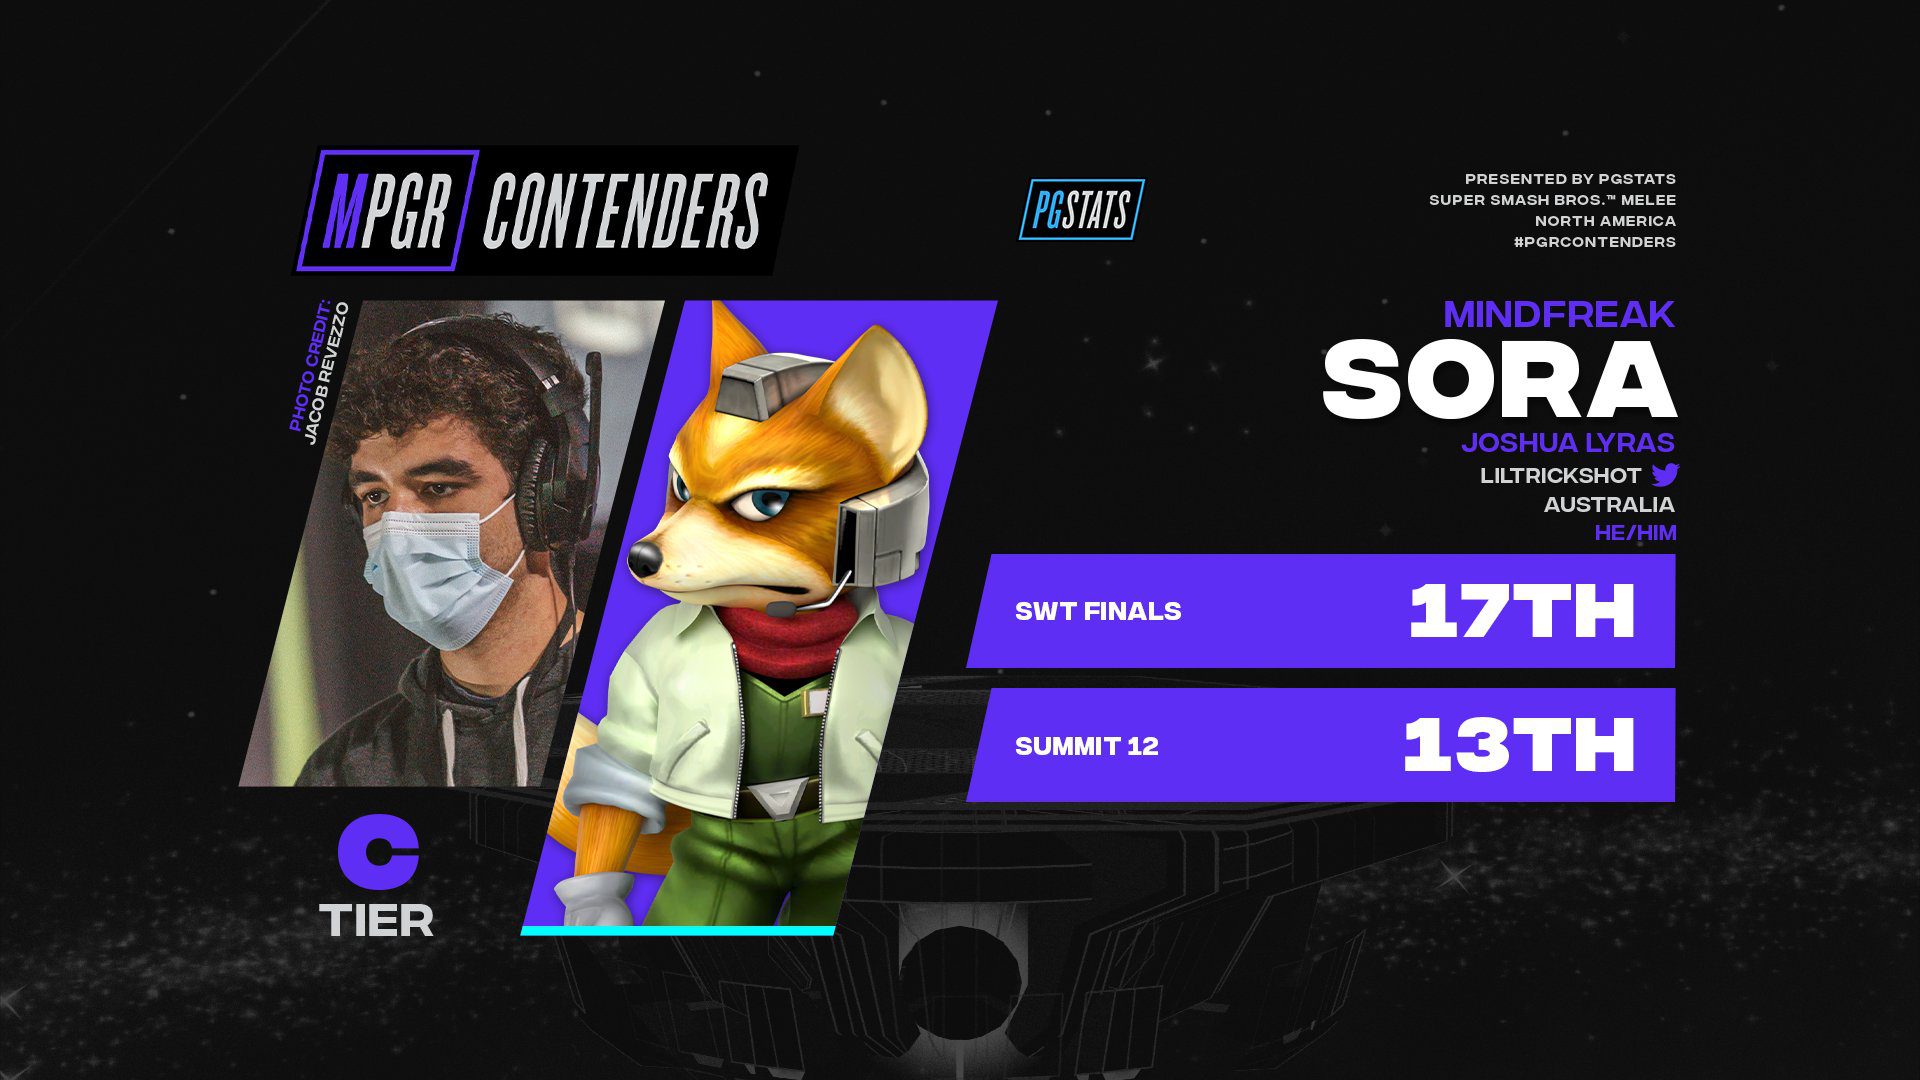 Sora’s player card for MPGRContenders. 